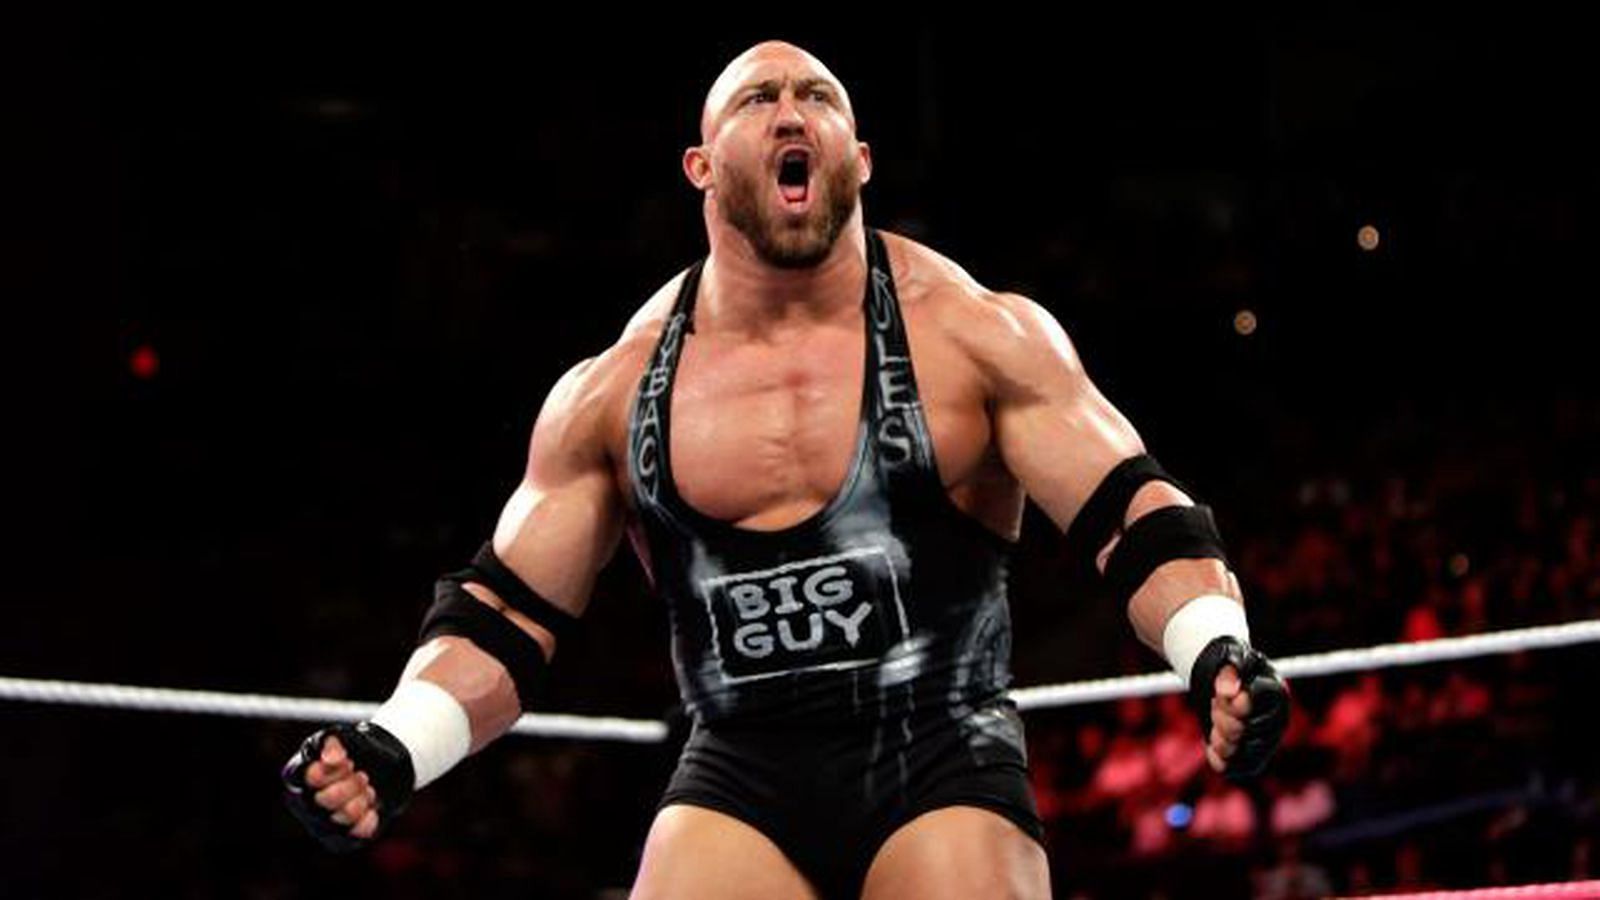 Ryback open to WWE return on one condition